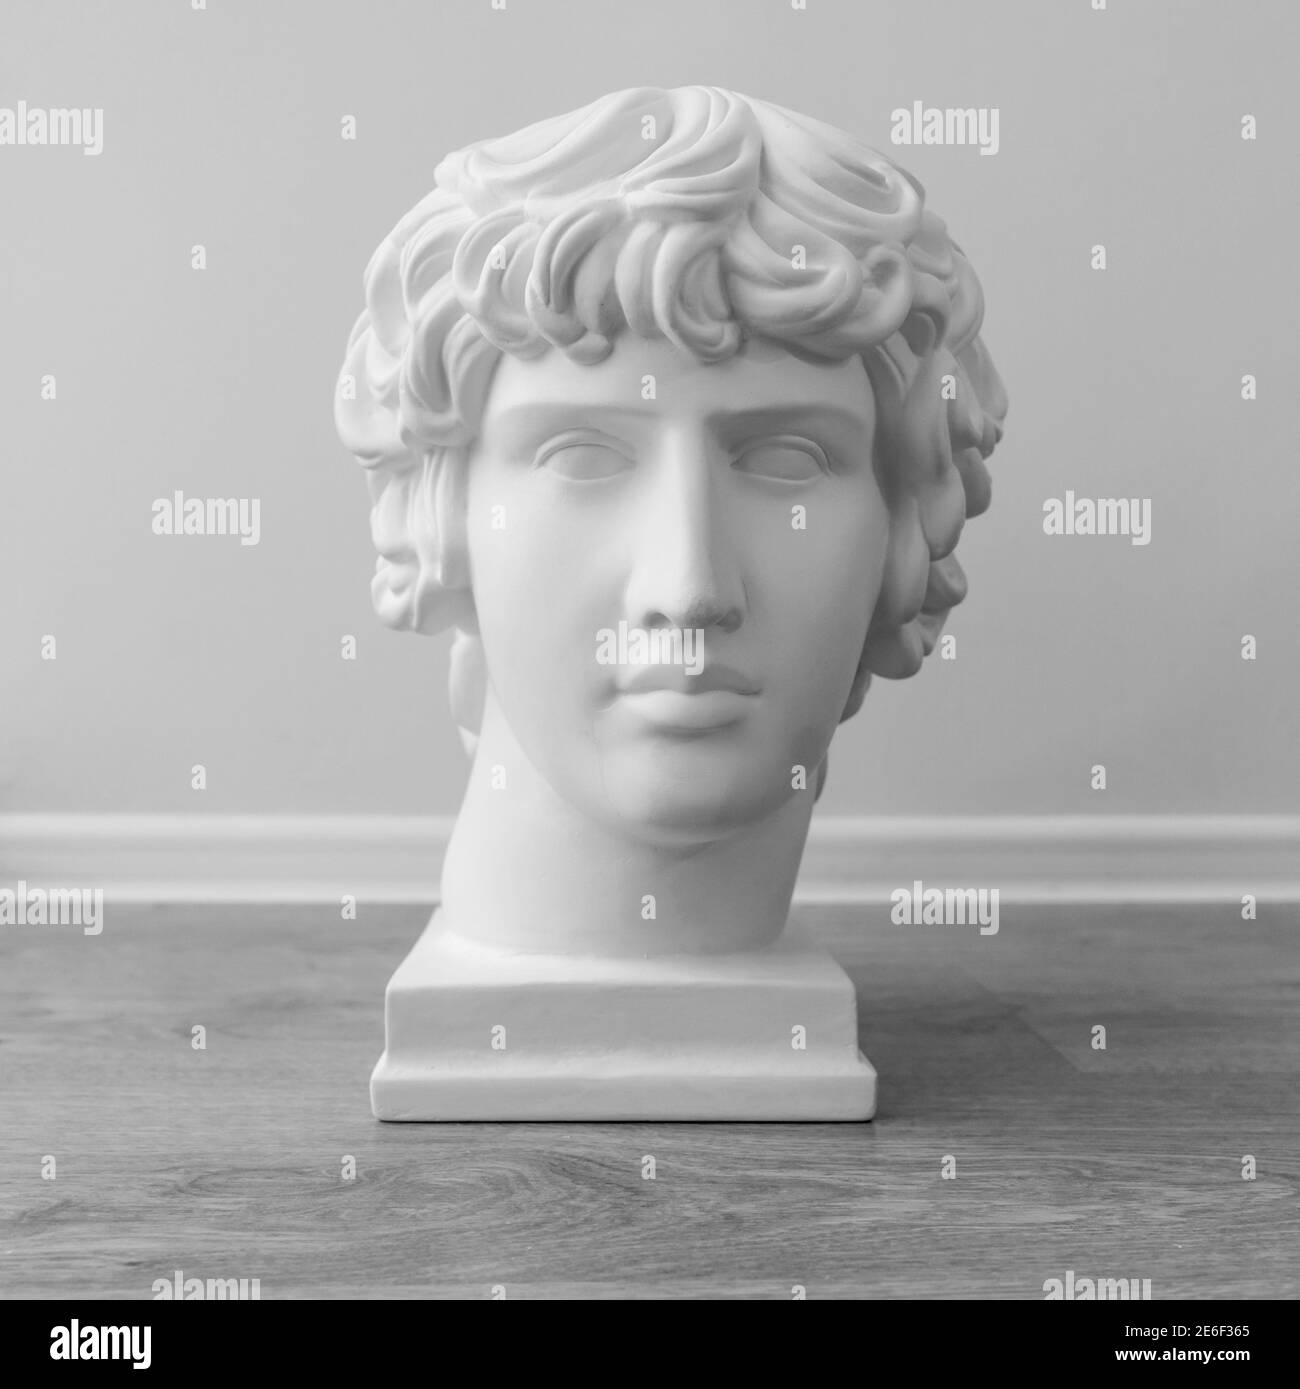 White plaster bust sculpture portrait of a young man. Black and white photo. Stock Photo